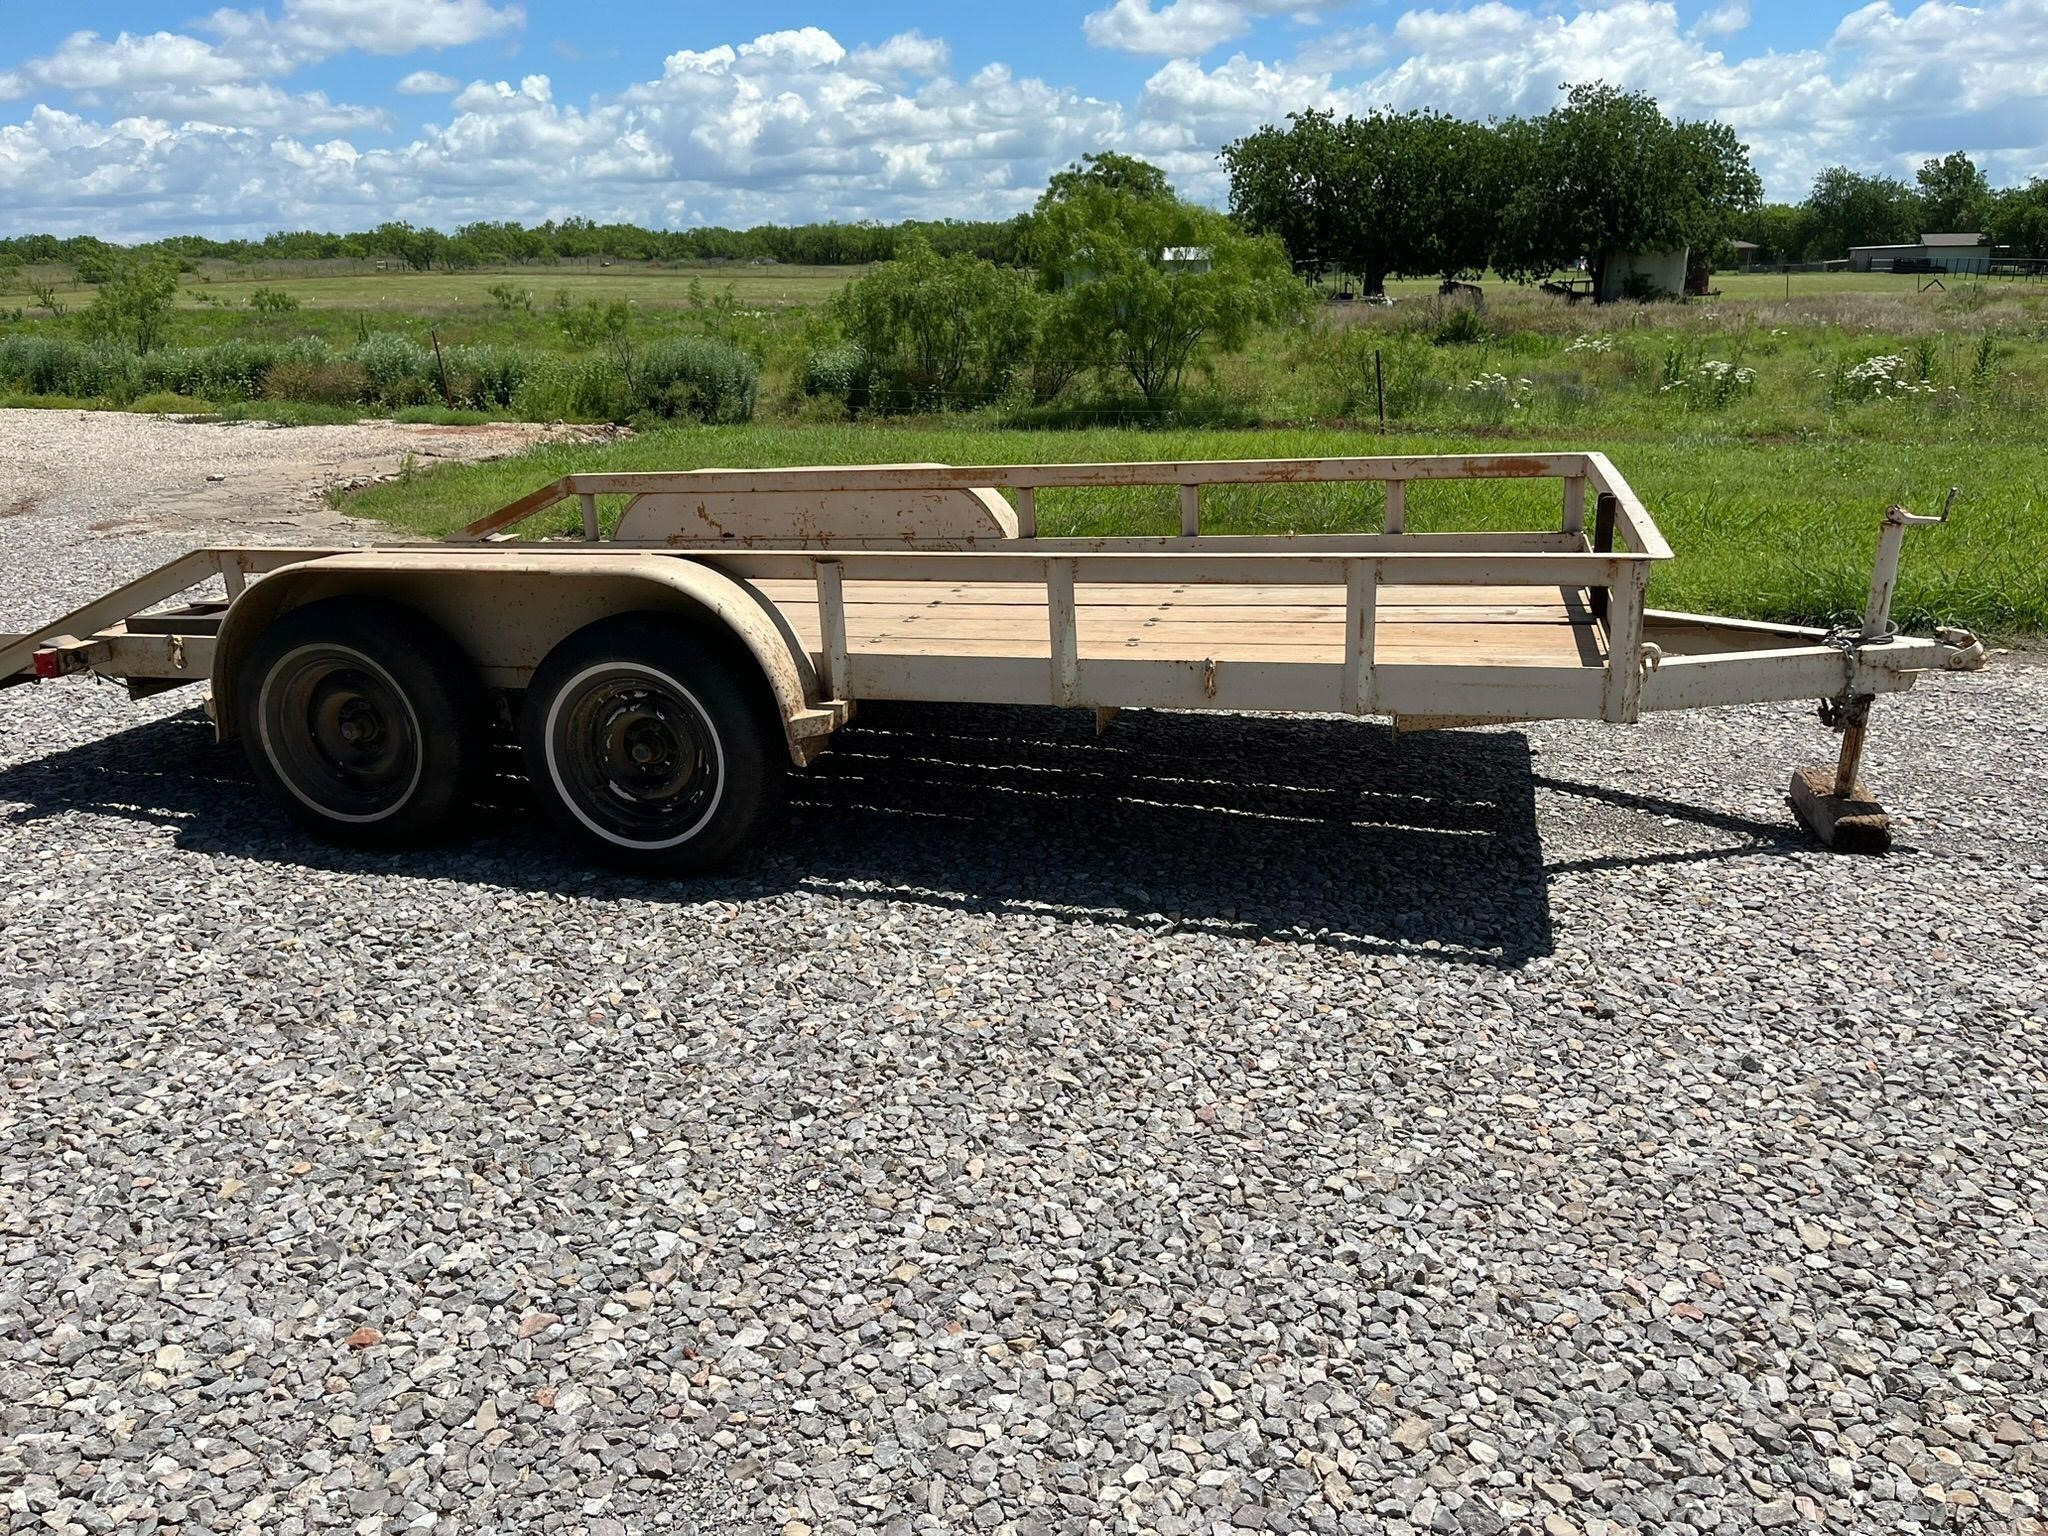 16ft Tandem Axle Flatbed Trailer with Ramps